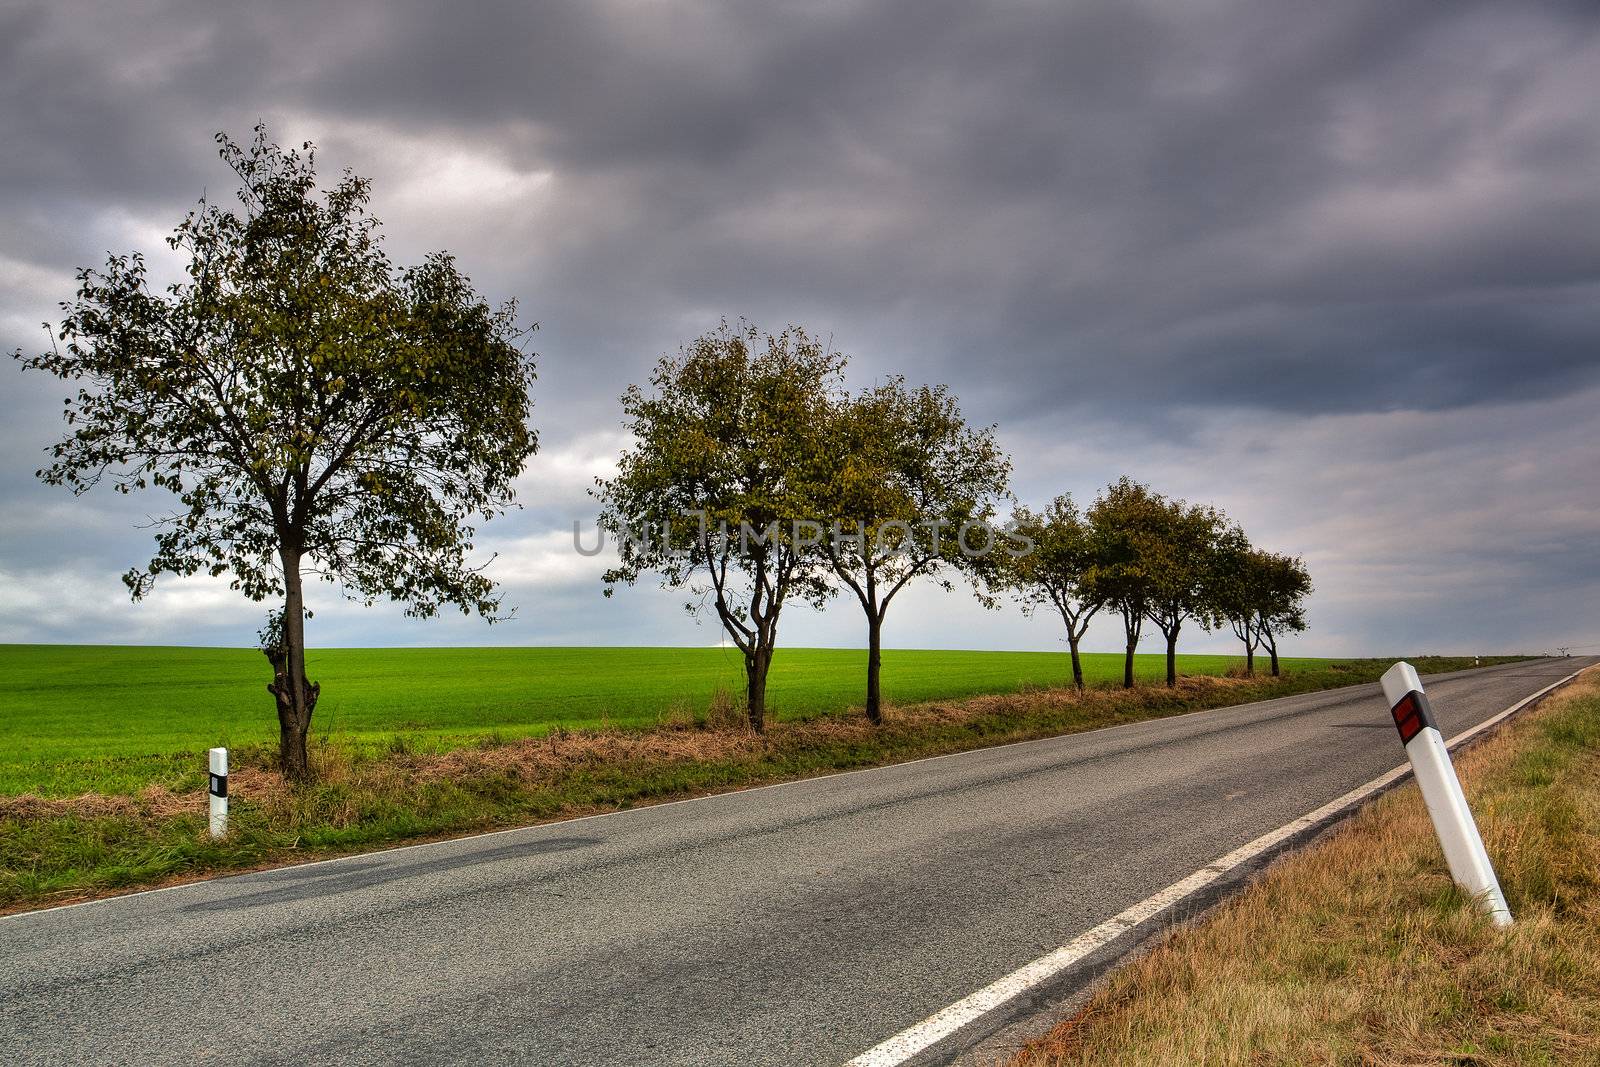 Long asphalt road and autumn trees on sky background